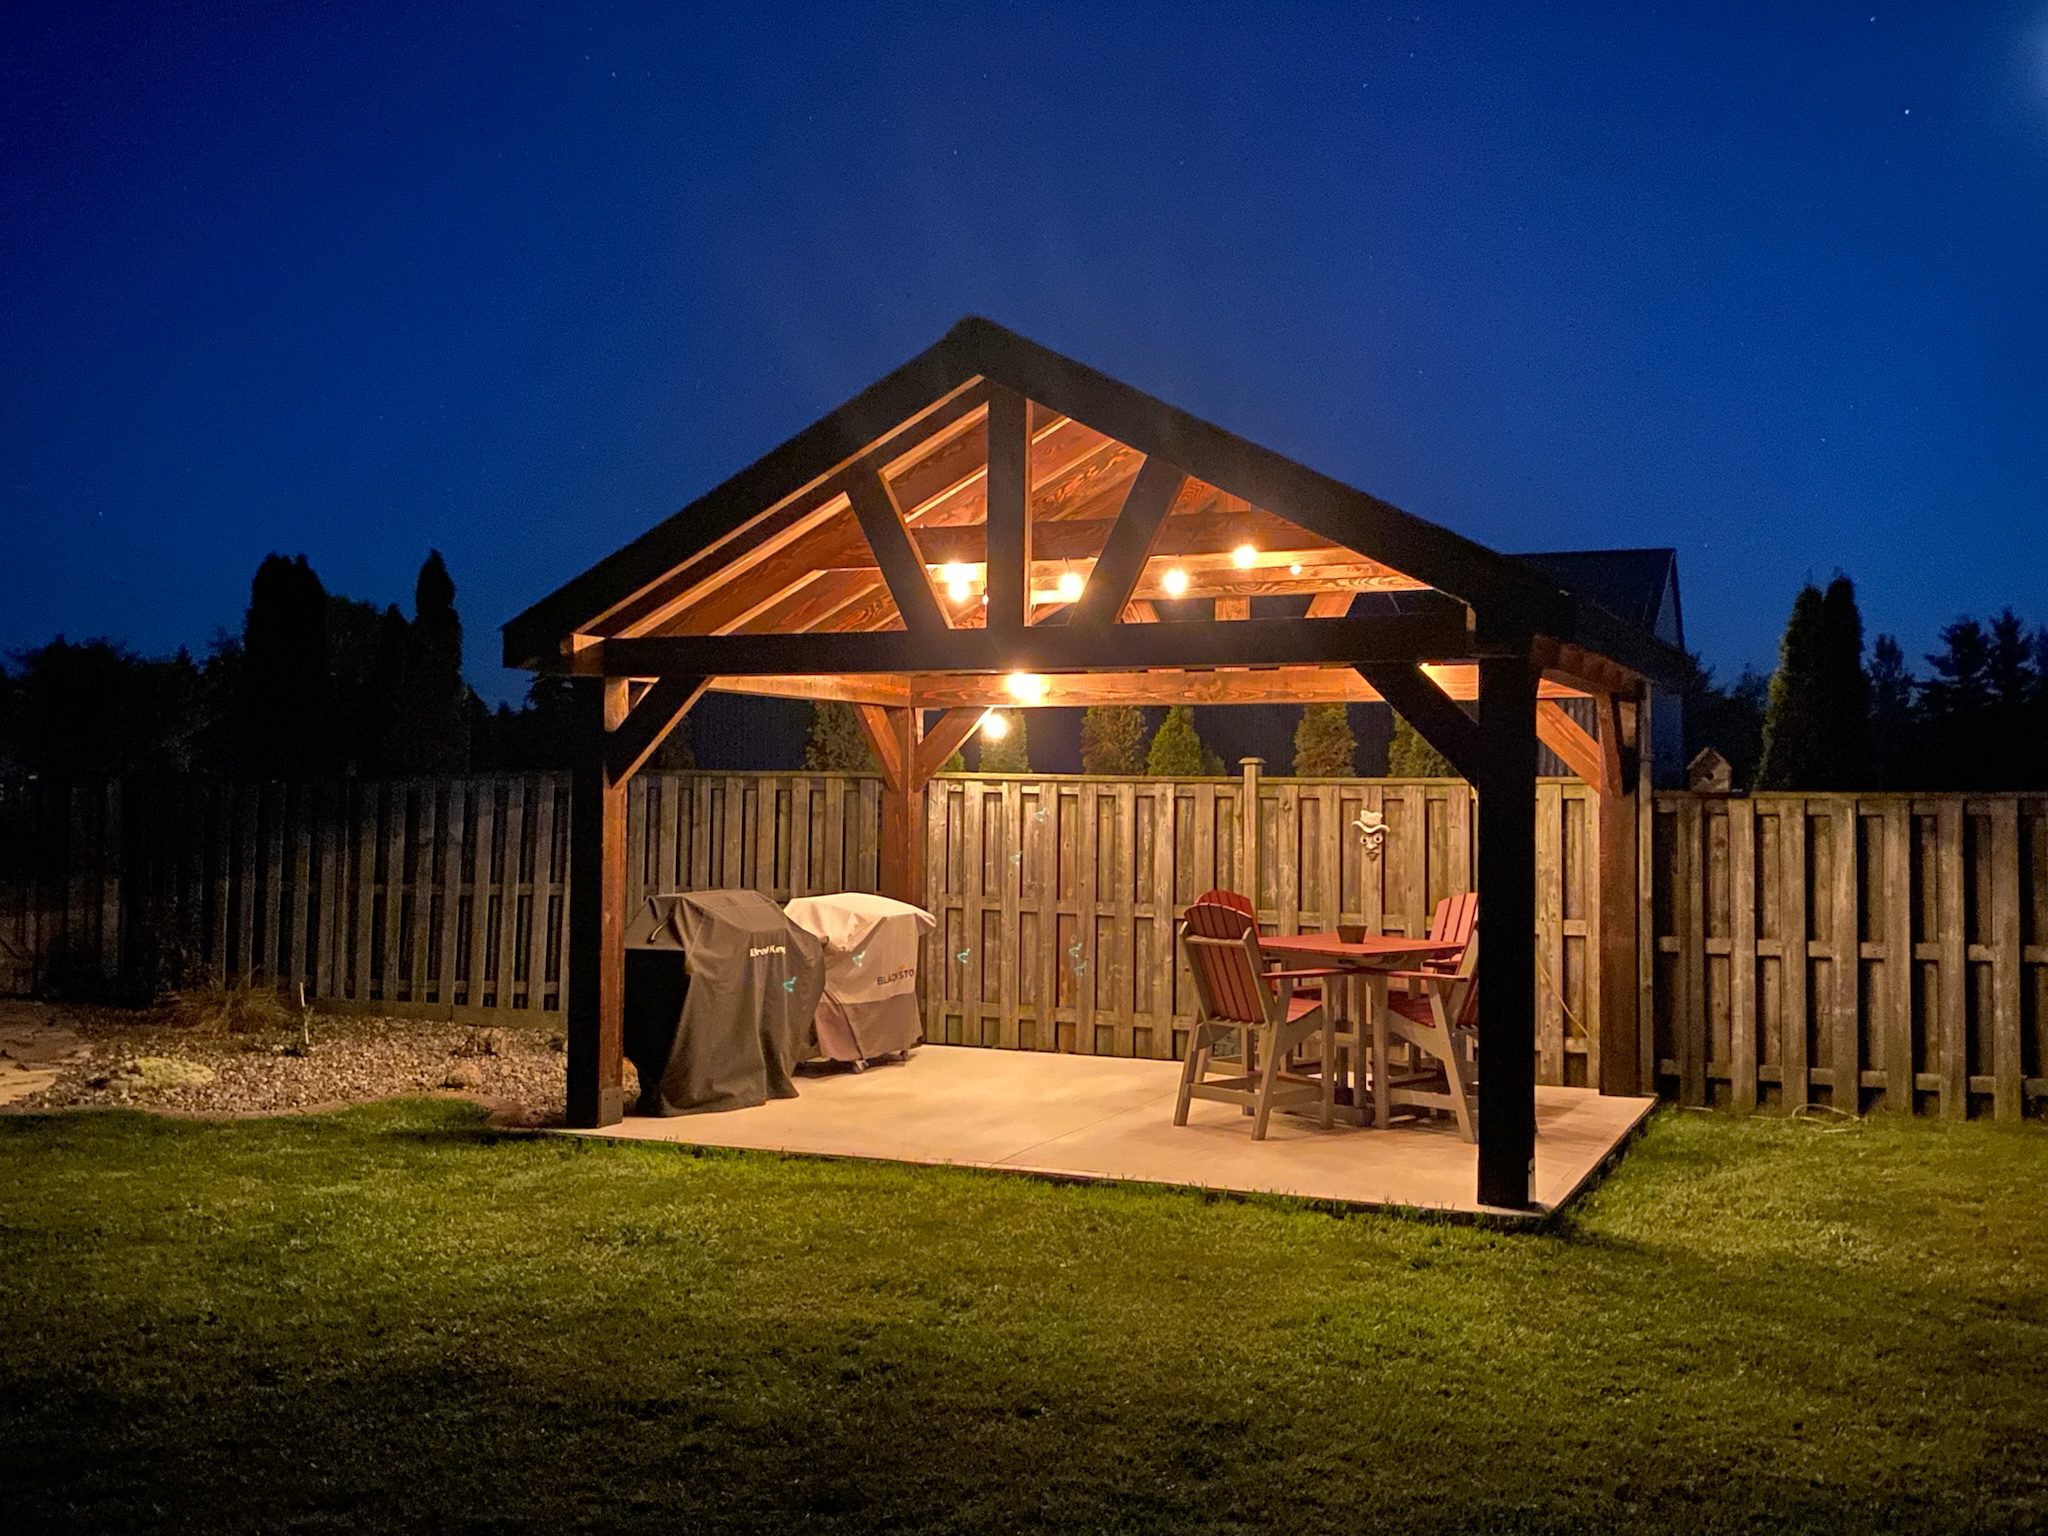 Timber frame BBQ and patio area with lighting